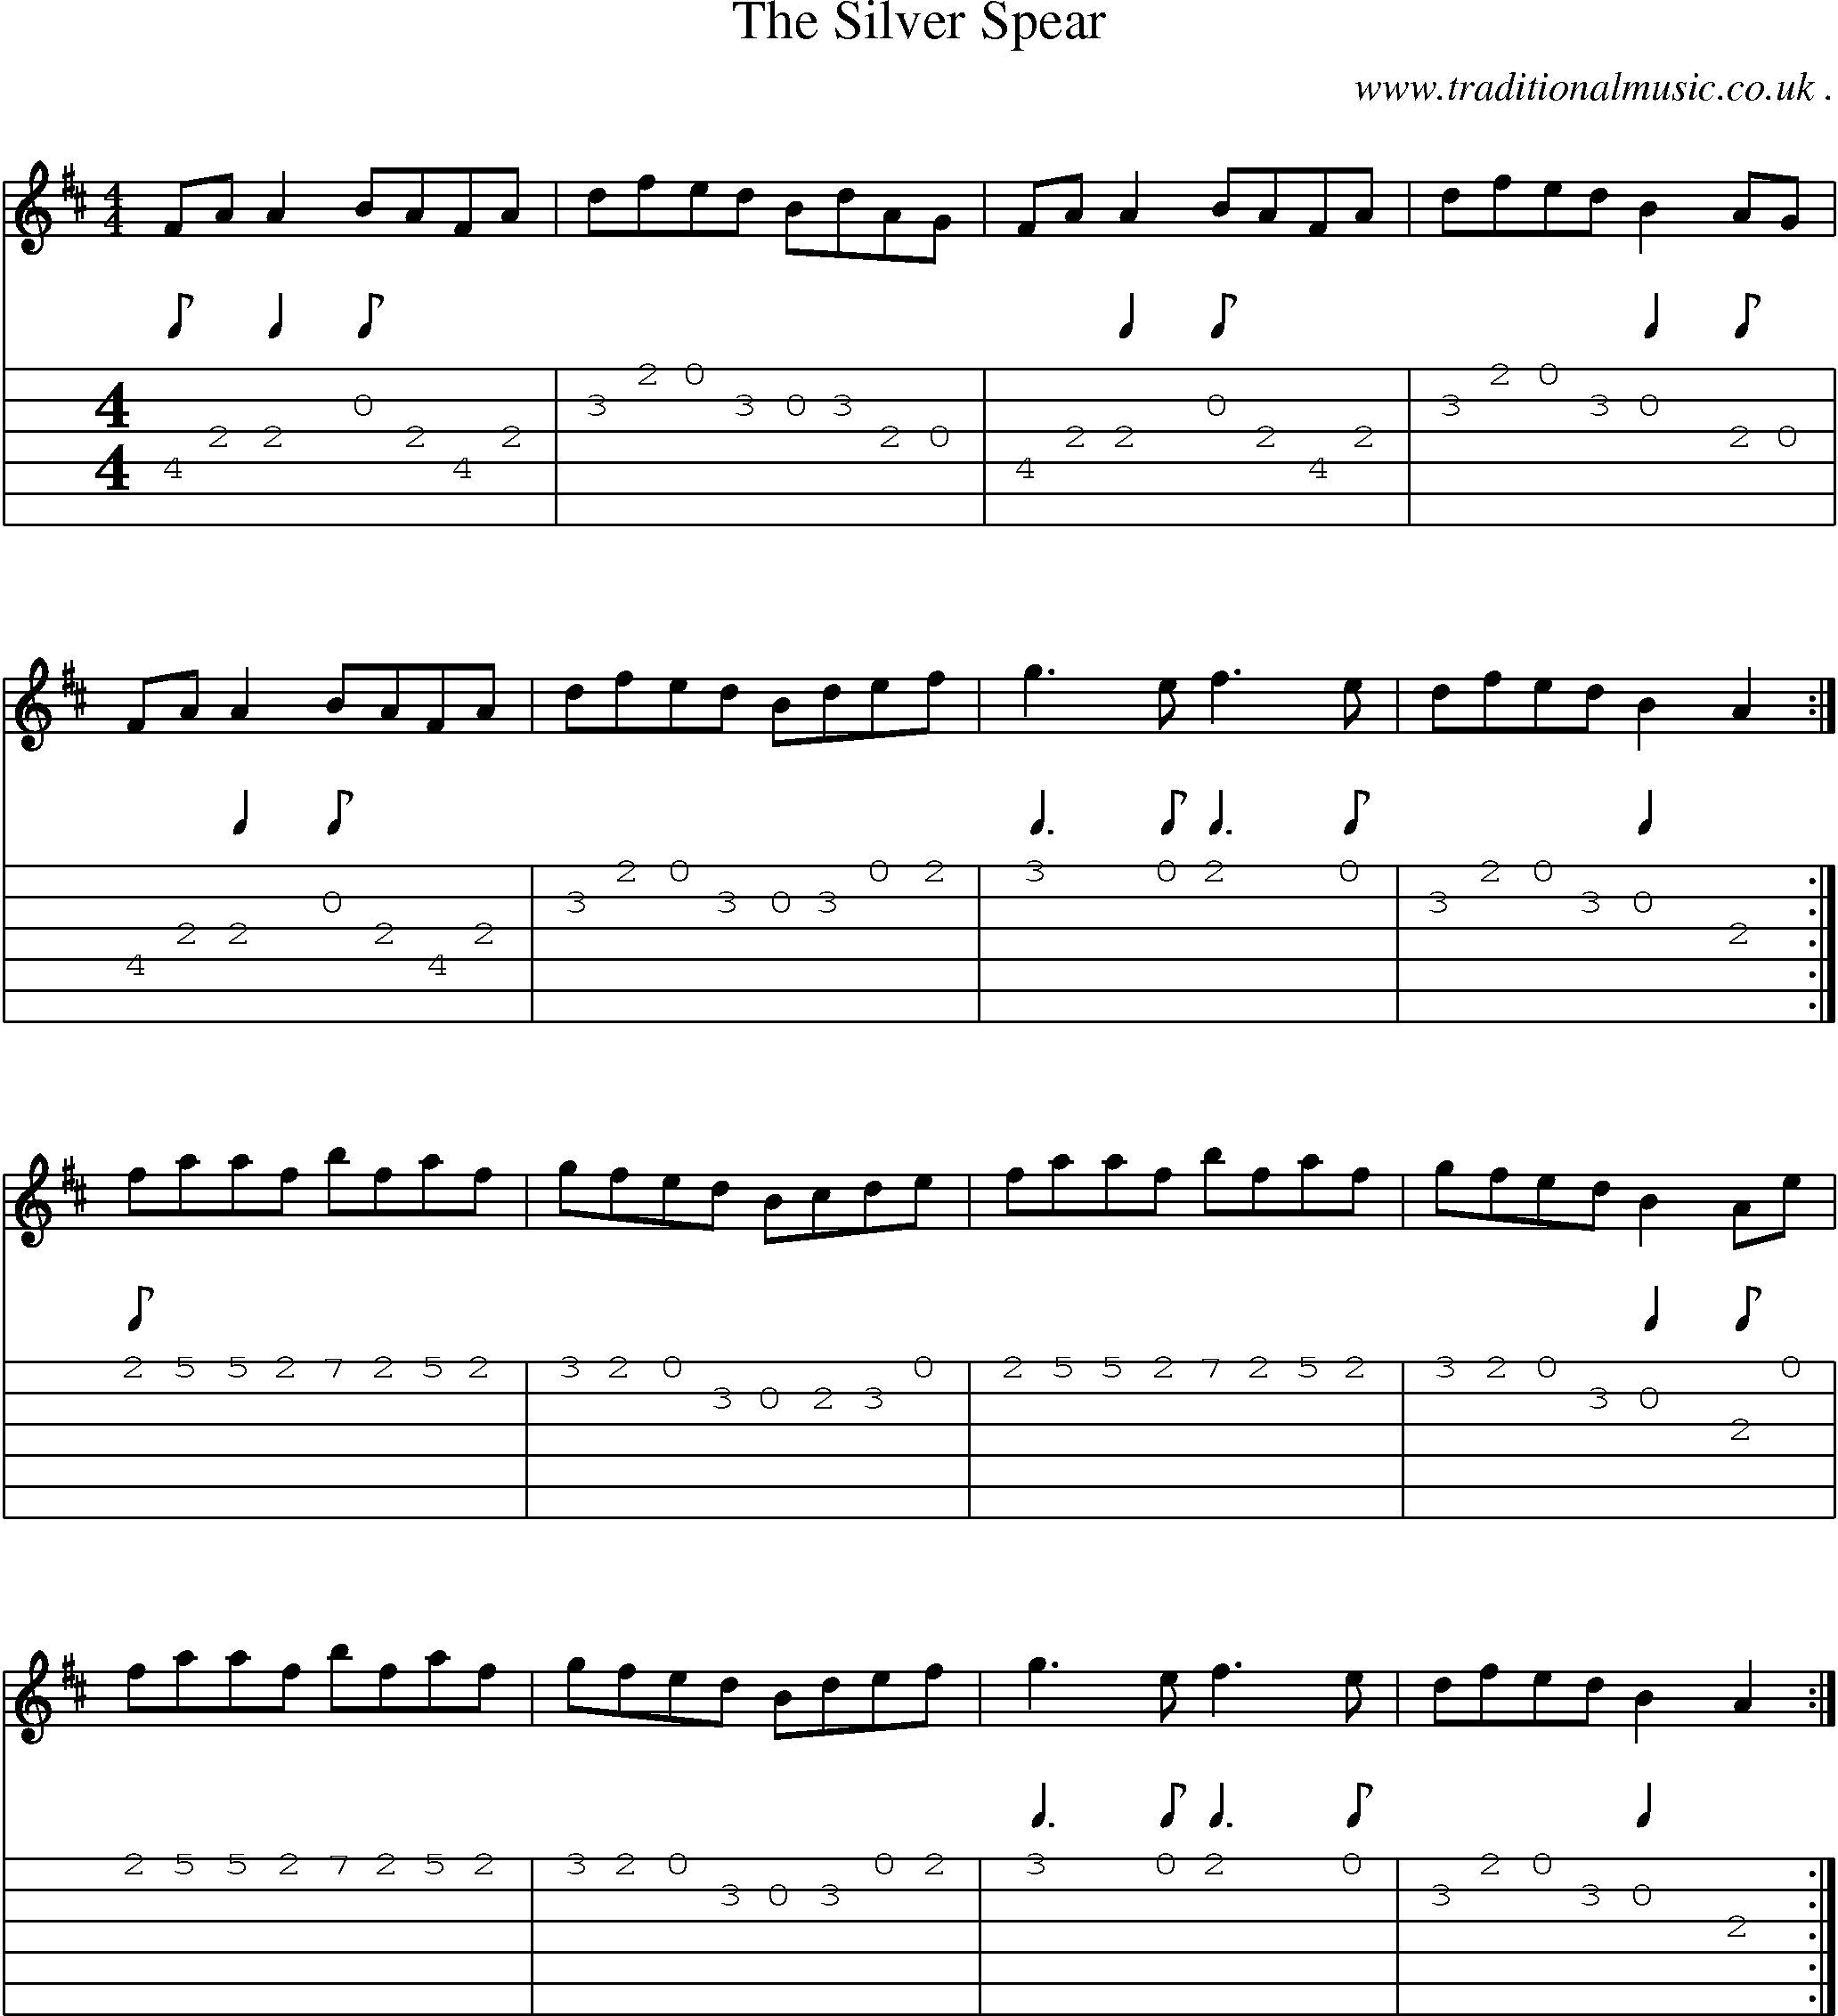 Sheet-Music and Guitar Tabs for The Silver Spear